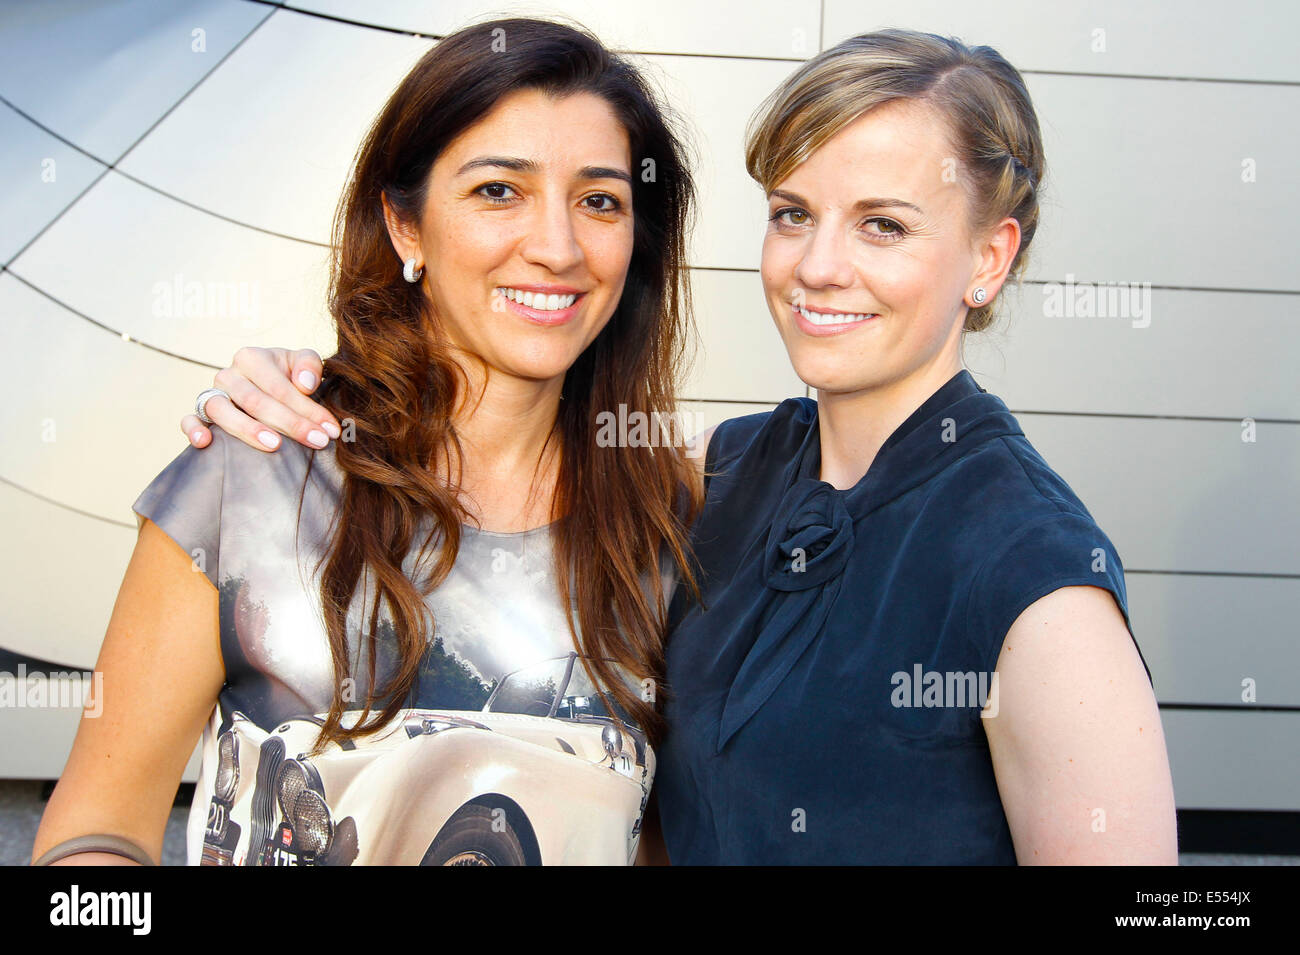 Hockenheim, Germany - July 19, 2014: Formula 1 Grand Prix of Germany with Fabiana Flosi, wife of Bernie Ecclestone, and Race Driver Susie Wolff/picture alliance Stock Photo